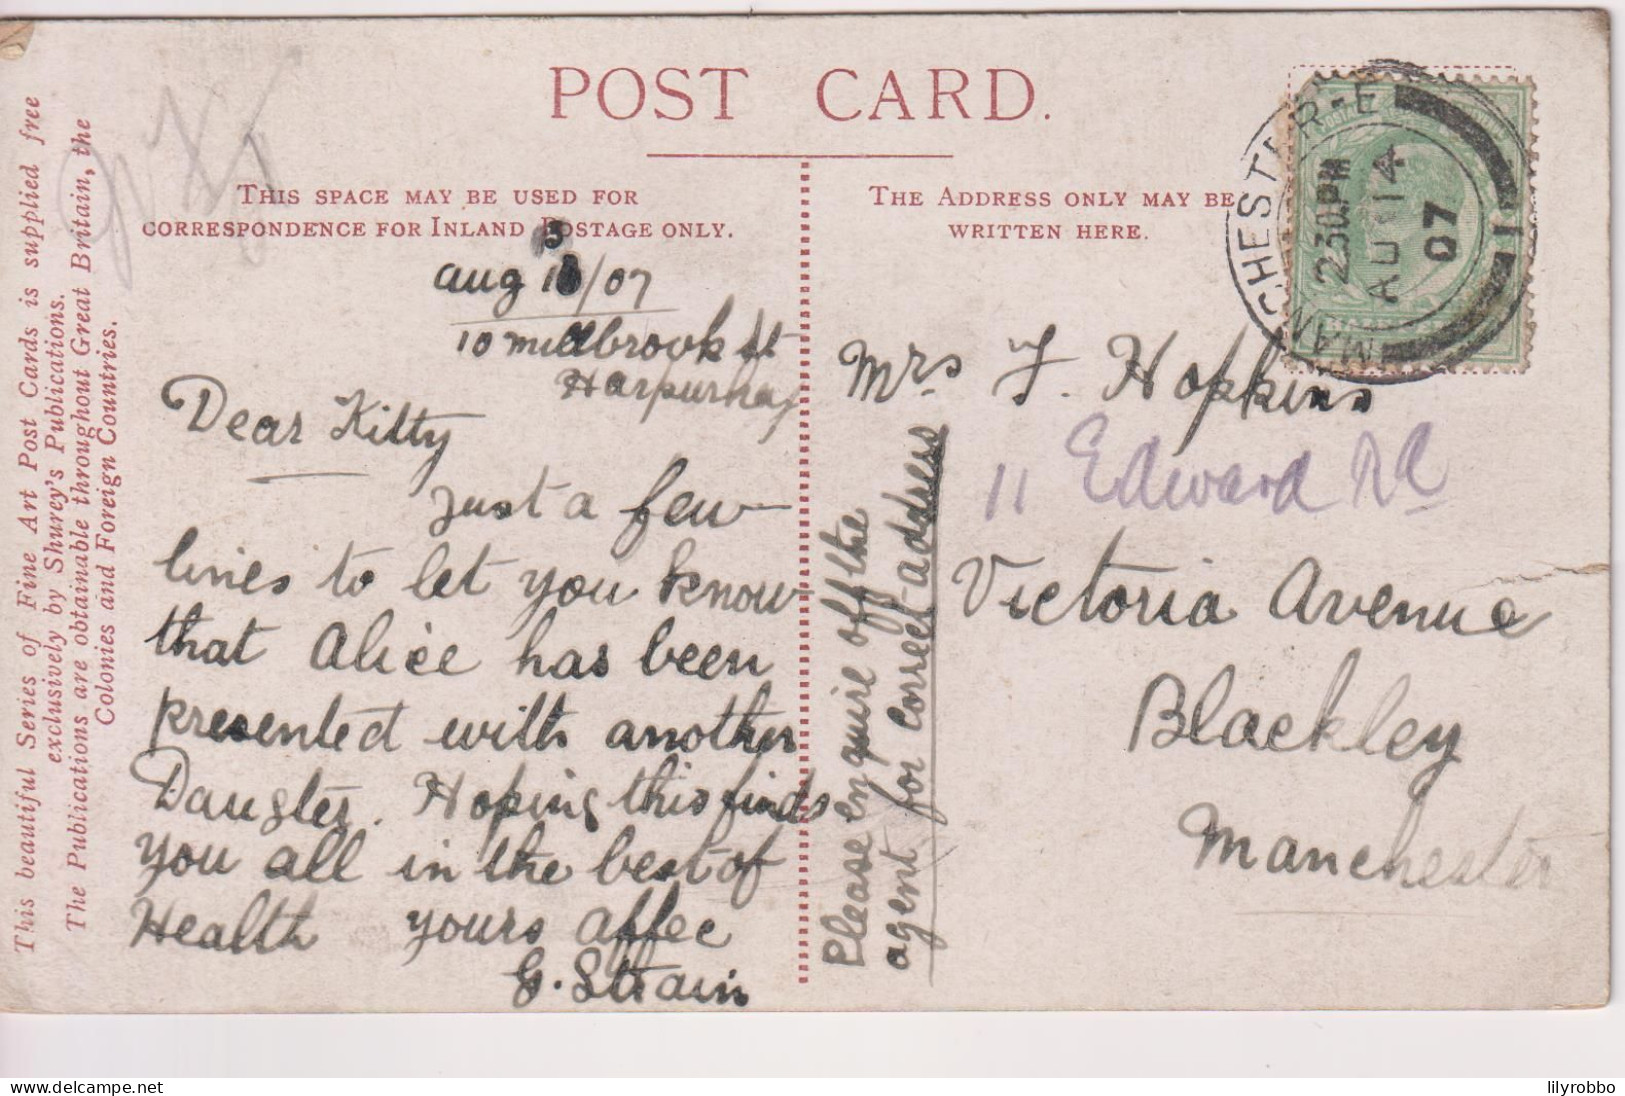 UK - Scotland - Forth (Railway) Bridge With Ferry In The Foreground Etc - Manchester UK Postmark 1907 - Opere D'Arte